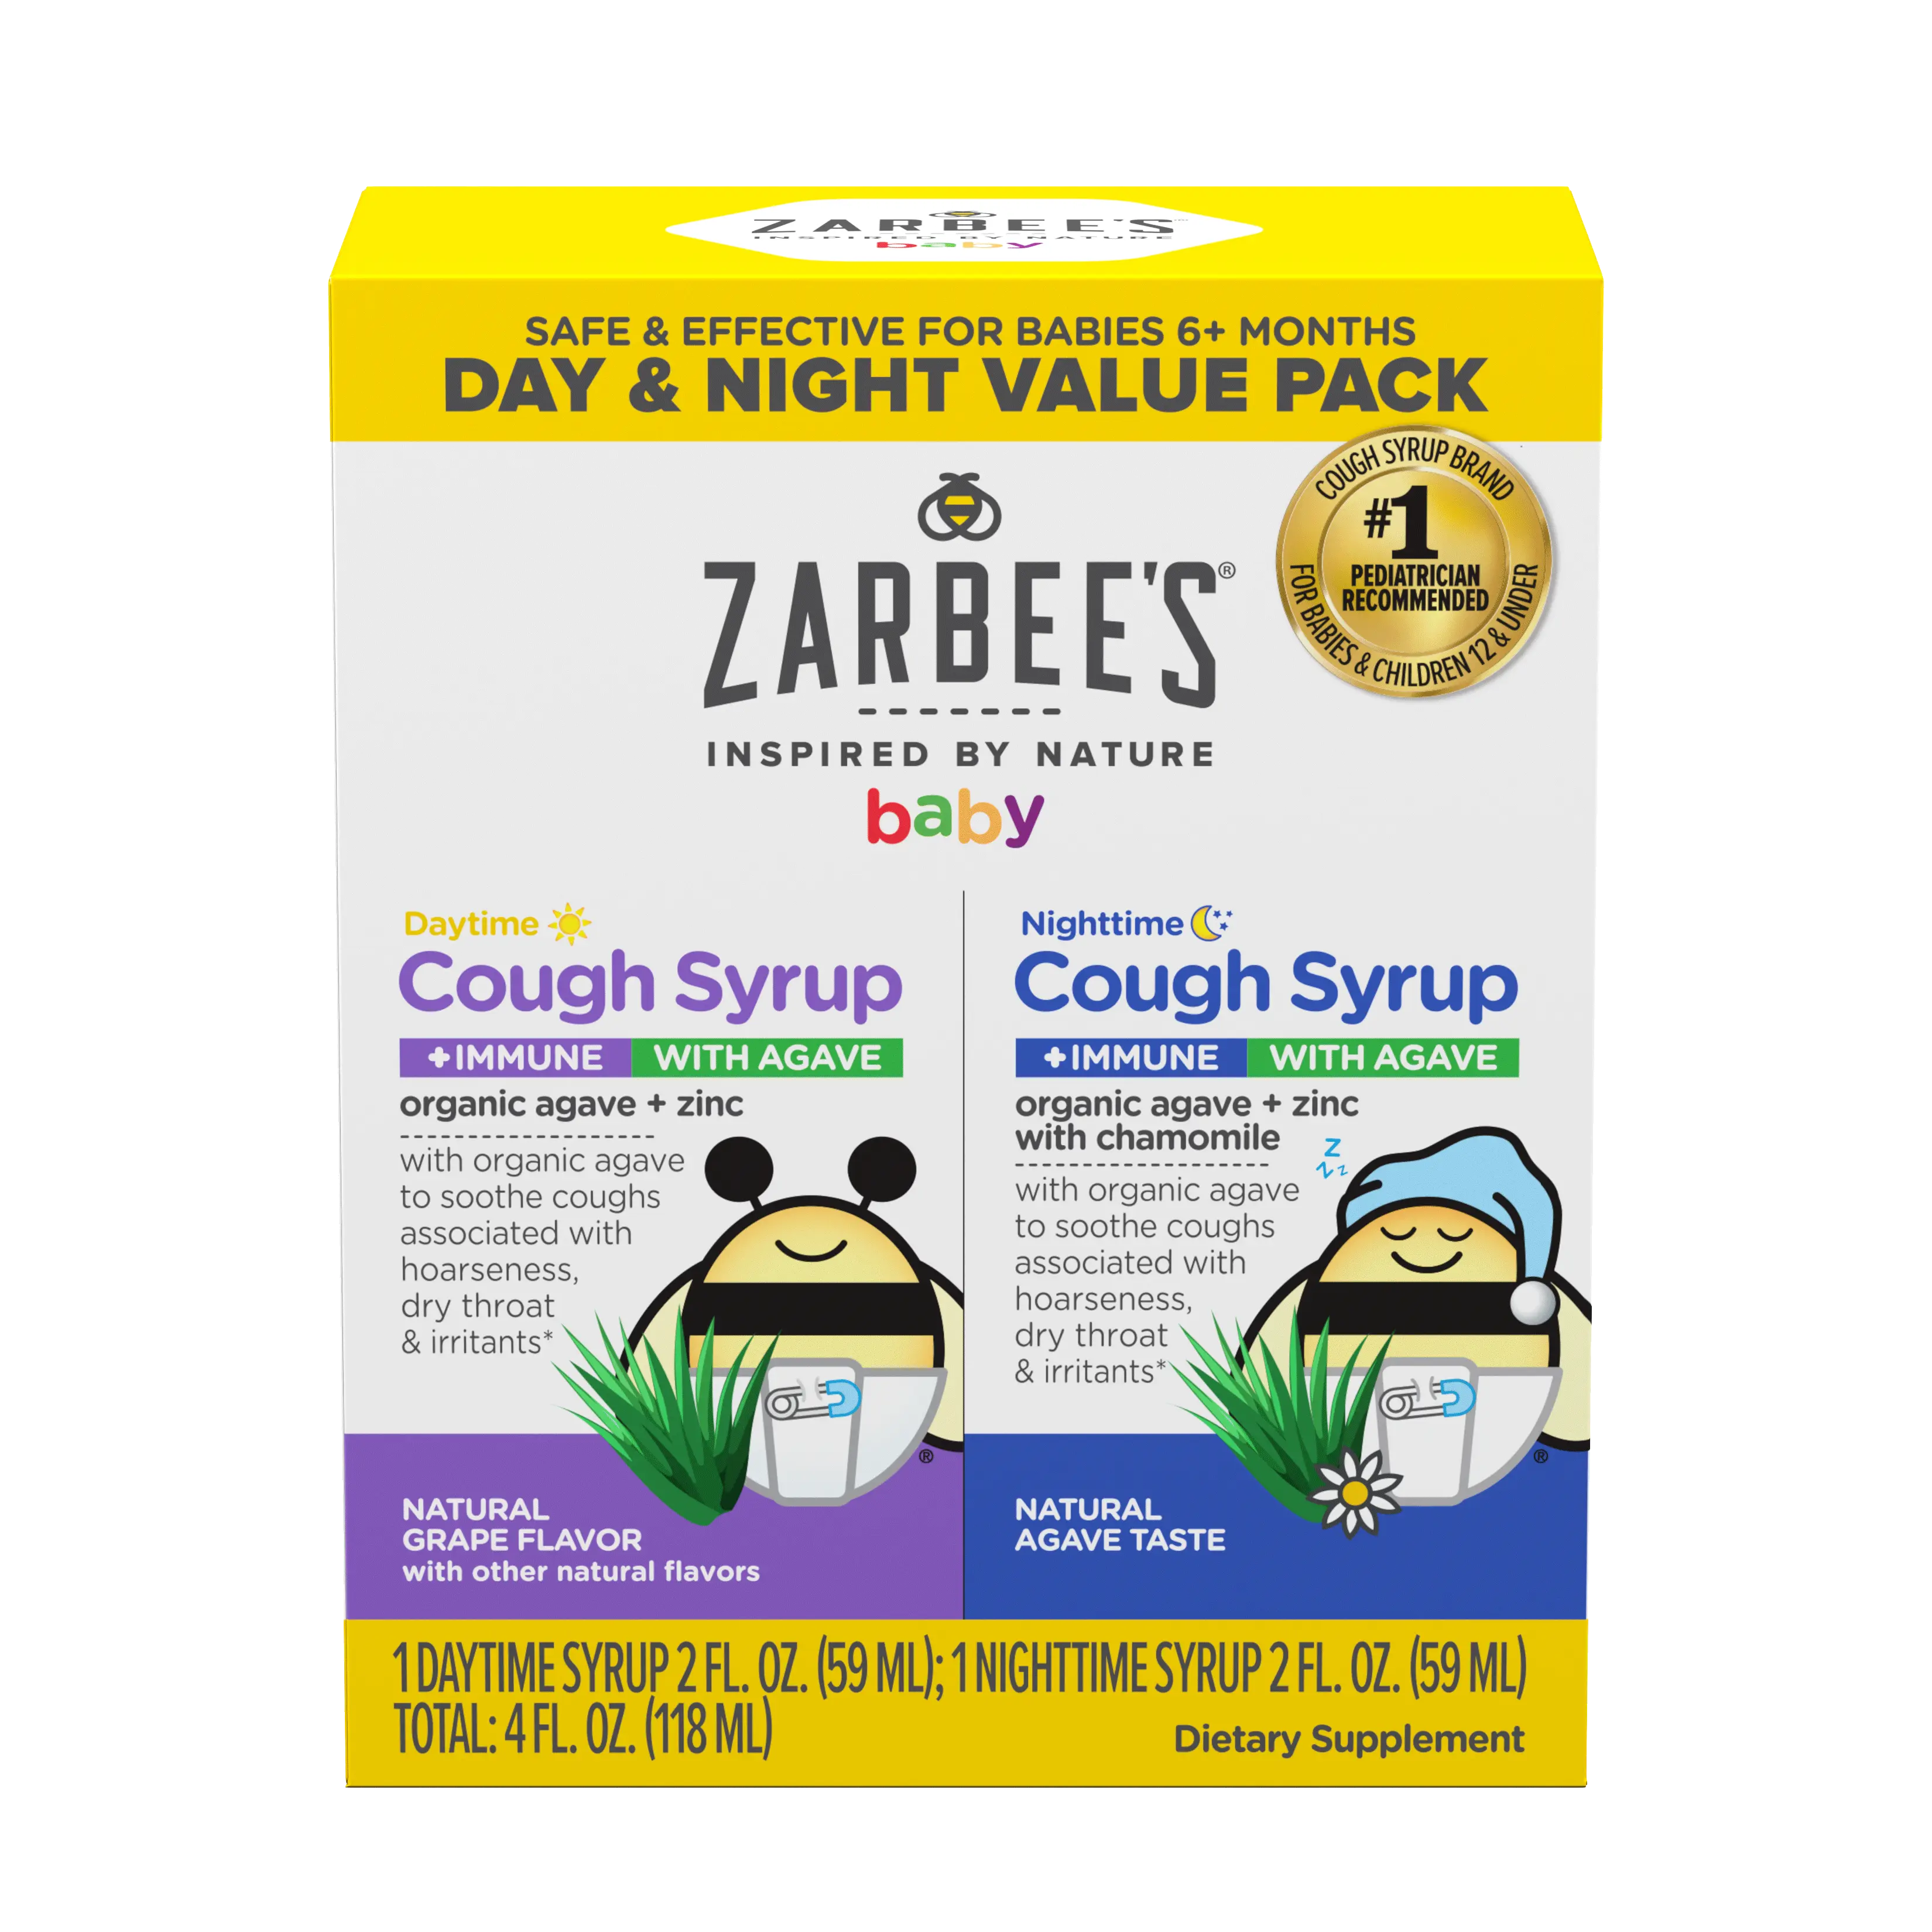 A rendering of the packaging for Zarbee's Baby Day + Night Cough Syrup + Immune with Agave Value Pack